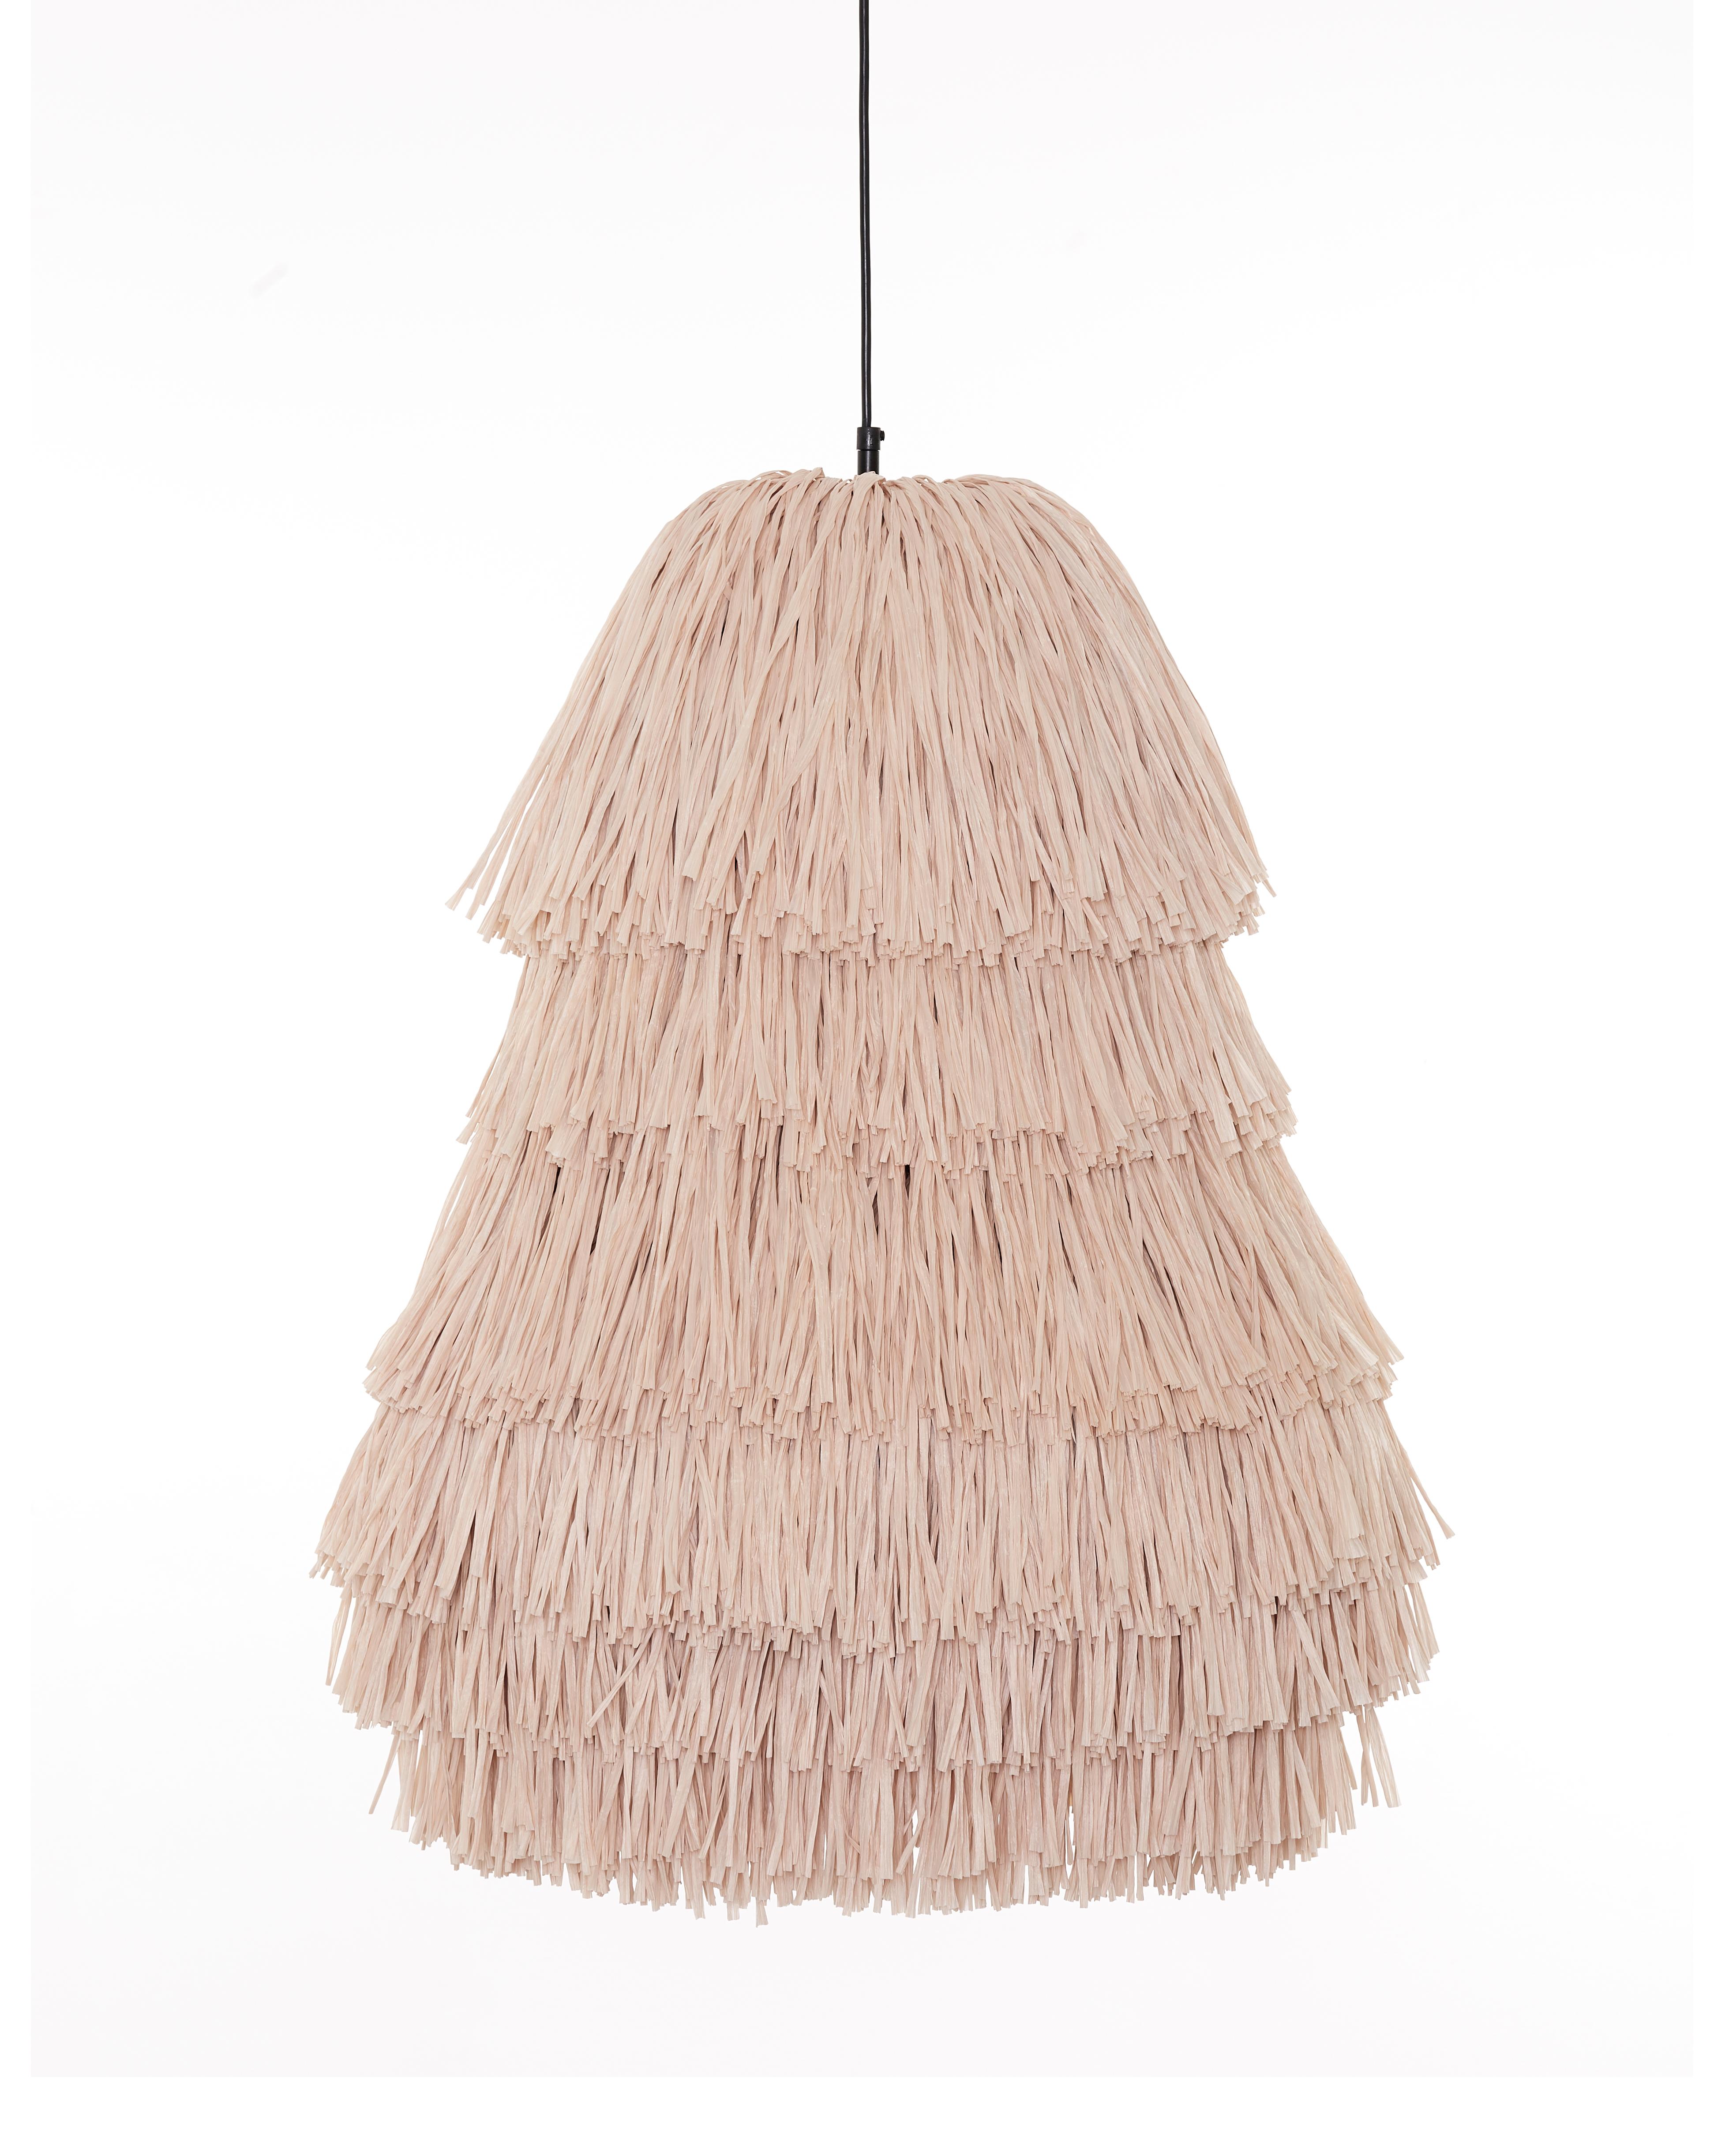 With their bulky silhouette and rustling fringes, the Fran lights are reminiscent of a piñata. While their cable becomes the suspension string, their fluttering body is made of high-quality rayon, a viscose fiber based on cellulose. The fringe